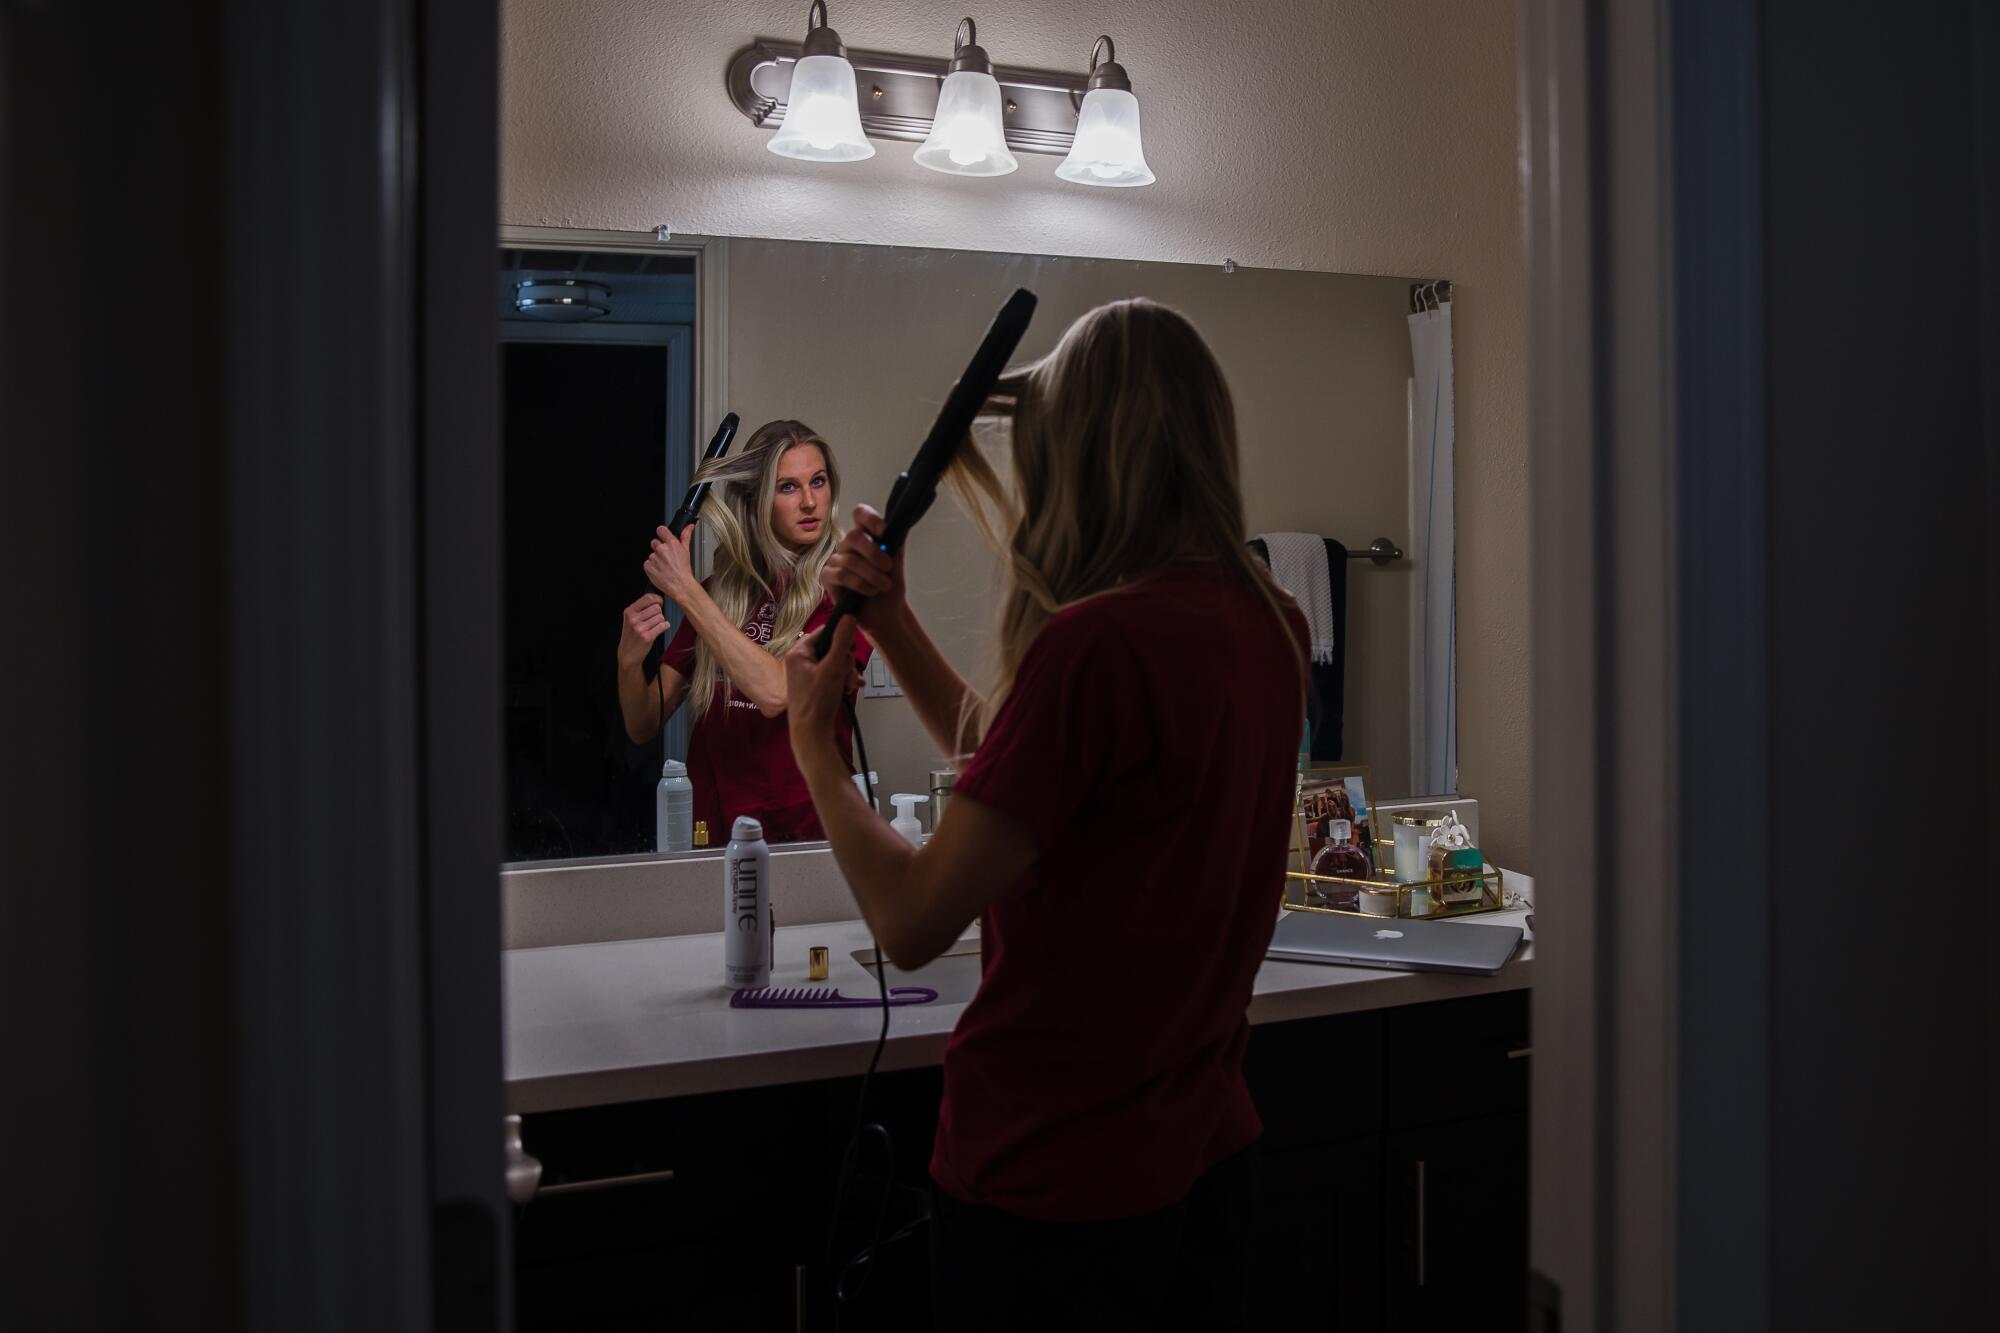 Rachael Lackner, 26, gets ready in her apartment in Mission Valley to go for acupuncture